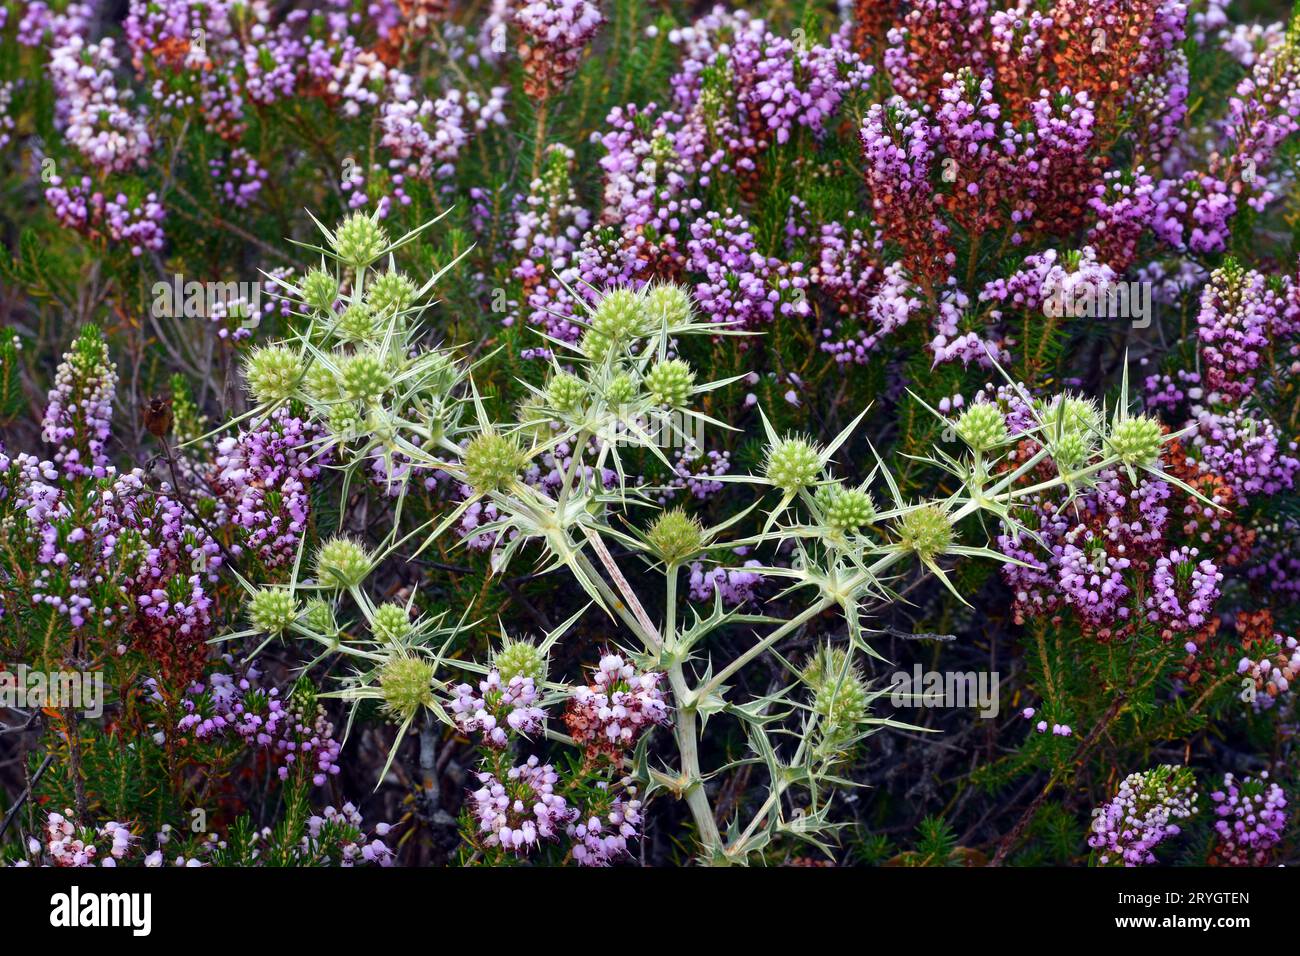 The field eryngo (Eryngium campestre) surrounded by the Cornish heath (Erica vagans) in flower Stock Photo